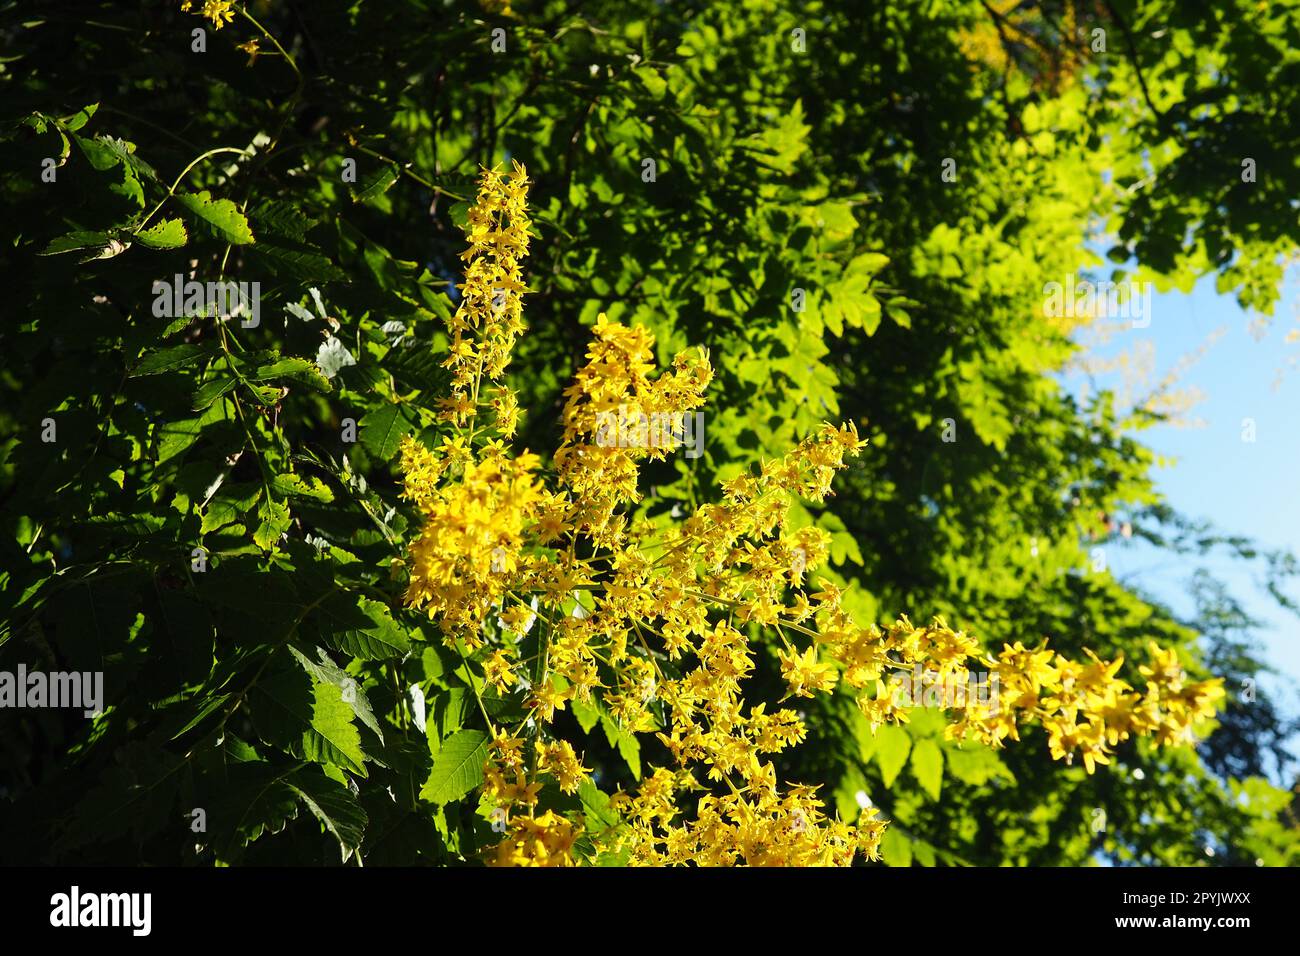 Koelreuteria paniculata is a species of flowering plant in the family Sapindaceae. A tree blooming with yellow flowers. Goldenrain tree, pride of India, China tree and the varnish tree. Stock Photo